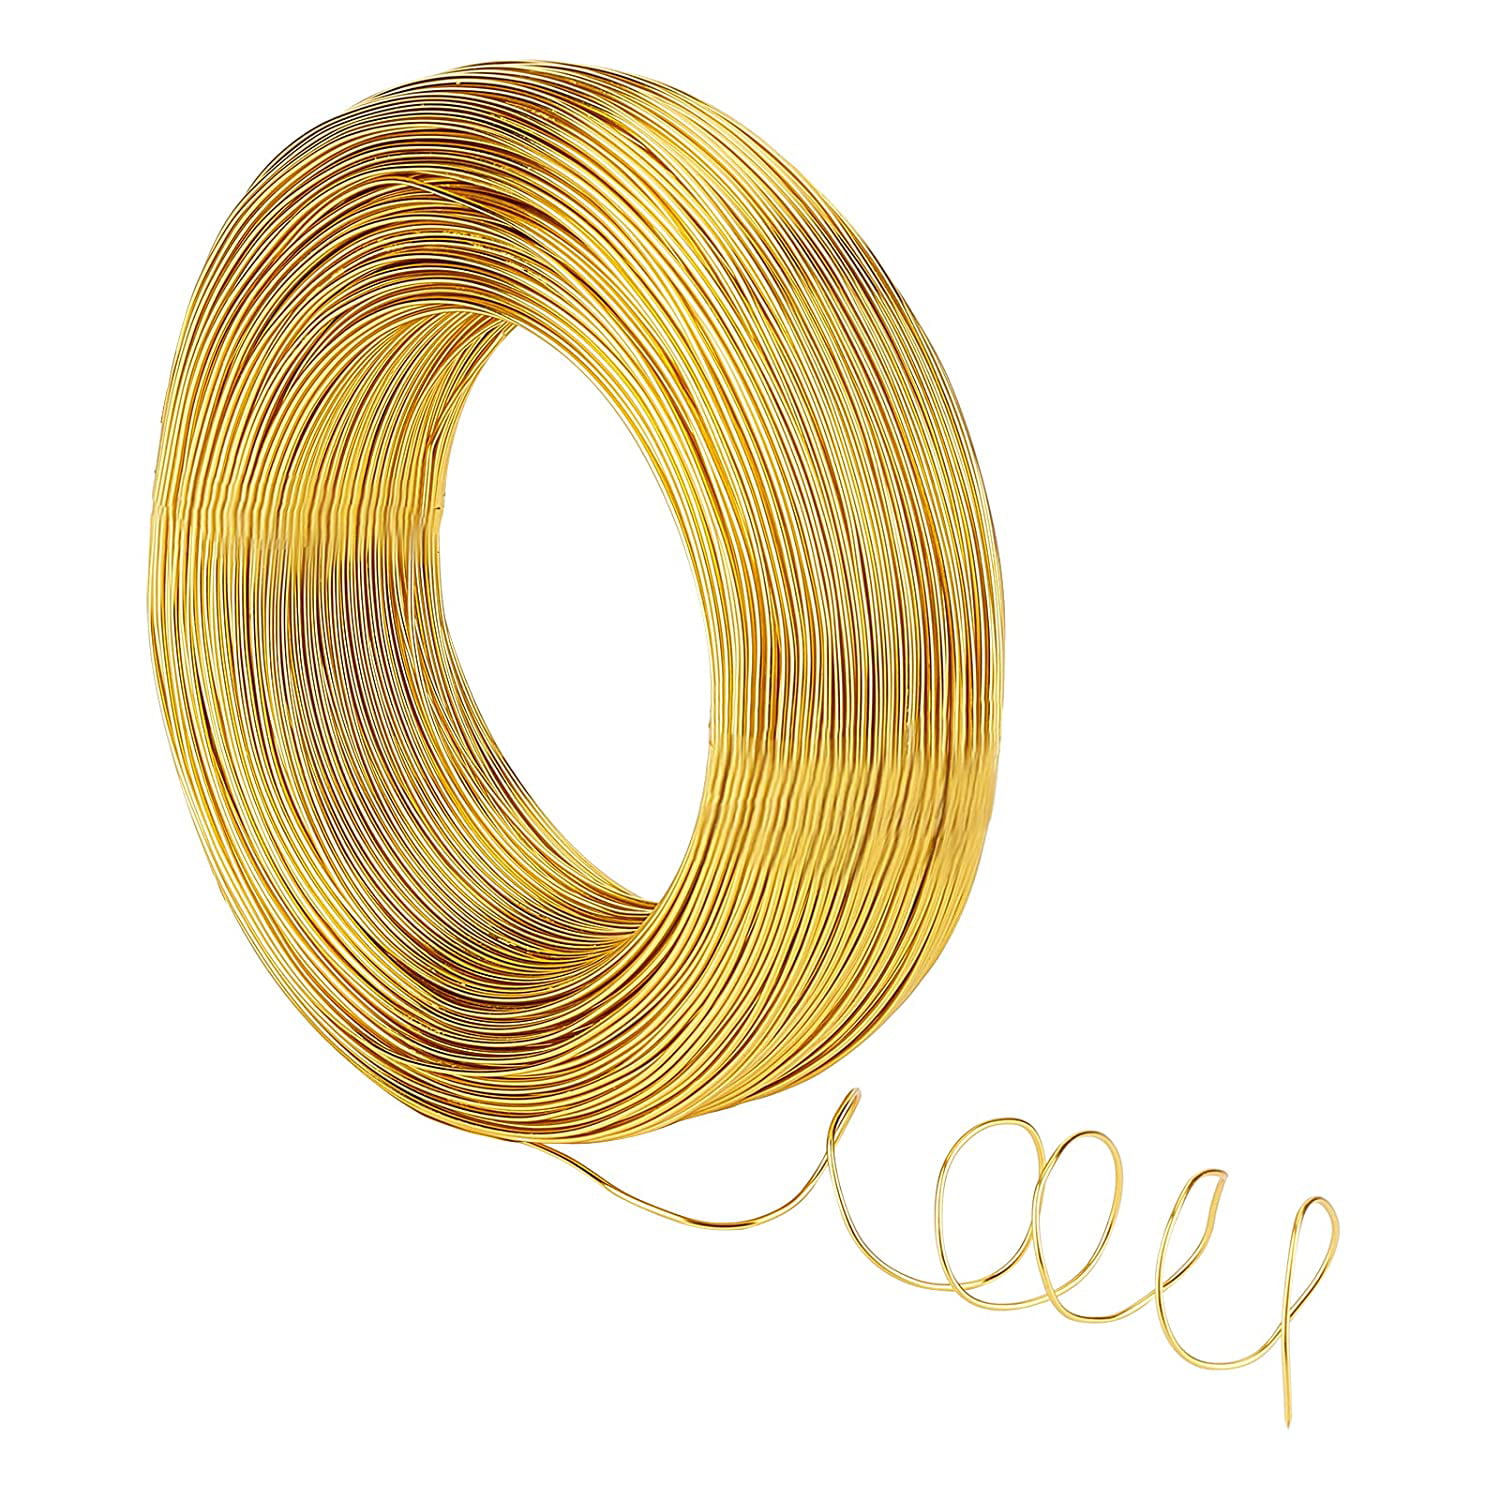 1 Roll 18 Gauge Aluminum Wire 200m Gold Aluminum Modelling Craft Wire for  Jewelry Craft Modelling Making Armatures and Sculpture 1mm in Diameter 